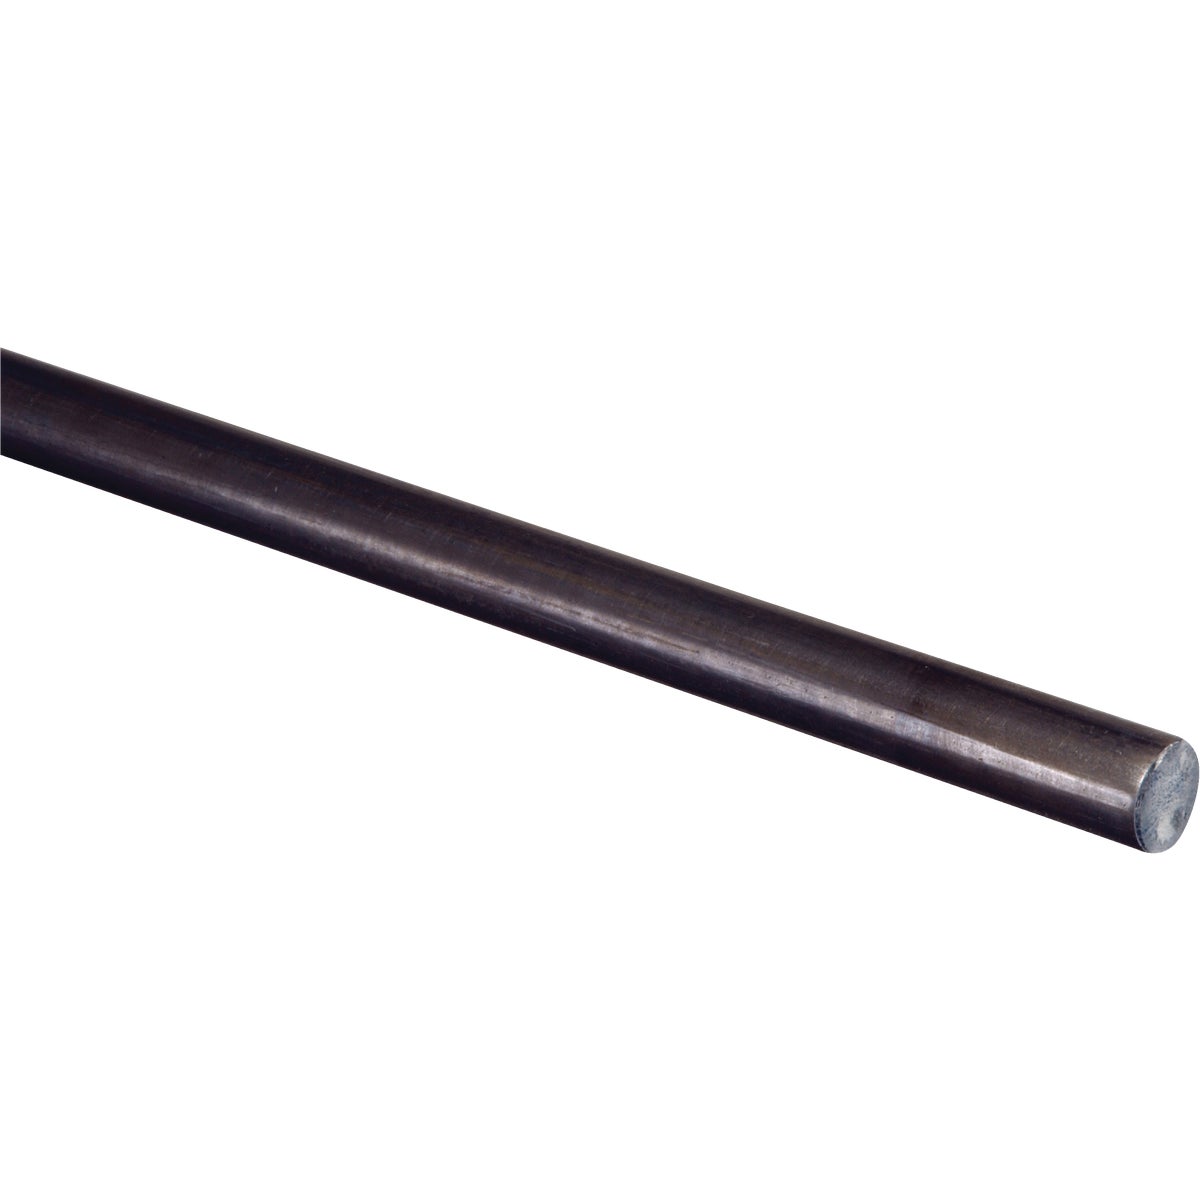 Item 733200, Solid round rods are traditionally used for axles, tent pegs, plant stakes 